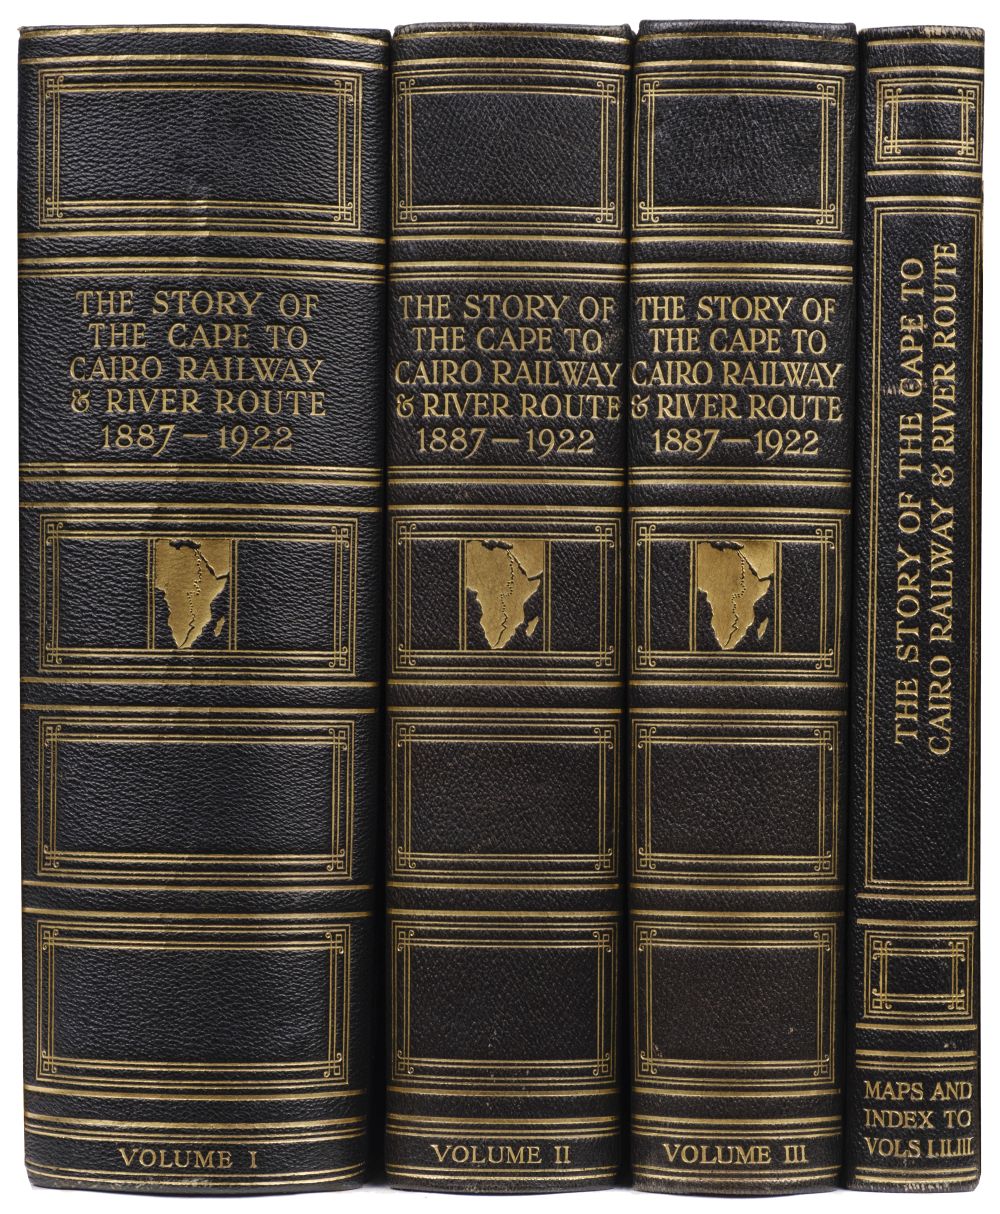 Weinthal (Leo). The Story of the Cape to Cairo Railway and River Route, 4 vols, 1st editions, [1923-